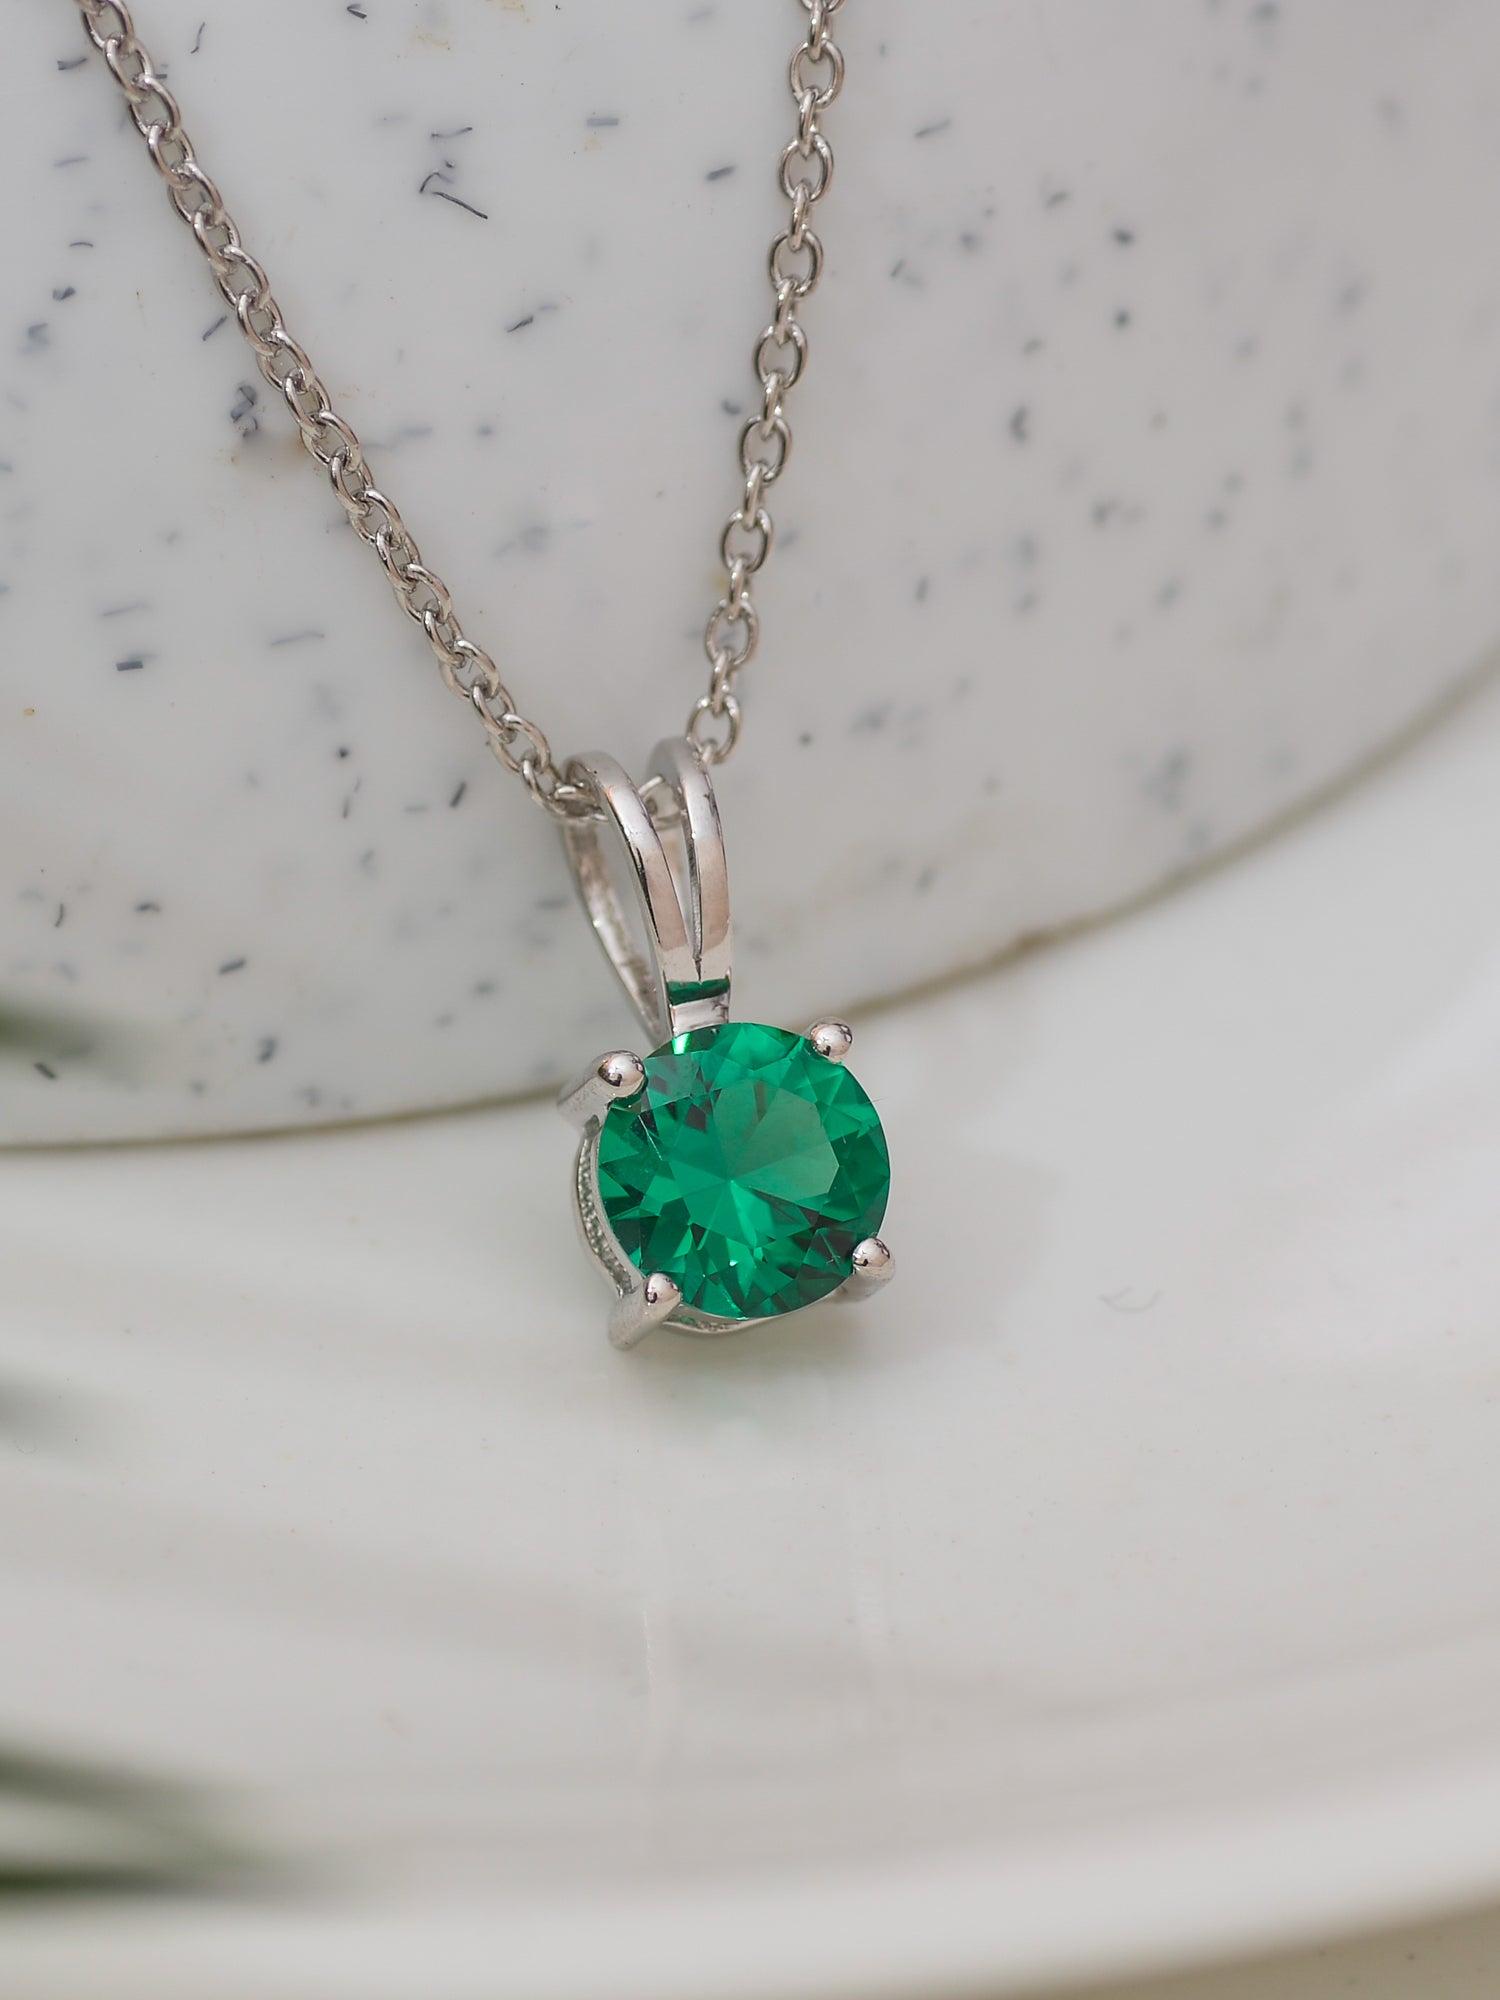 EMERALD PENDANT NECKLACE IN 925 STERLING SILVER FOR WOMEN-7